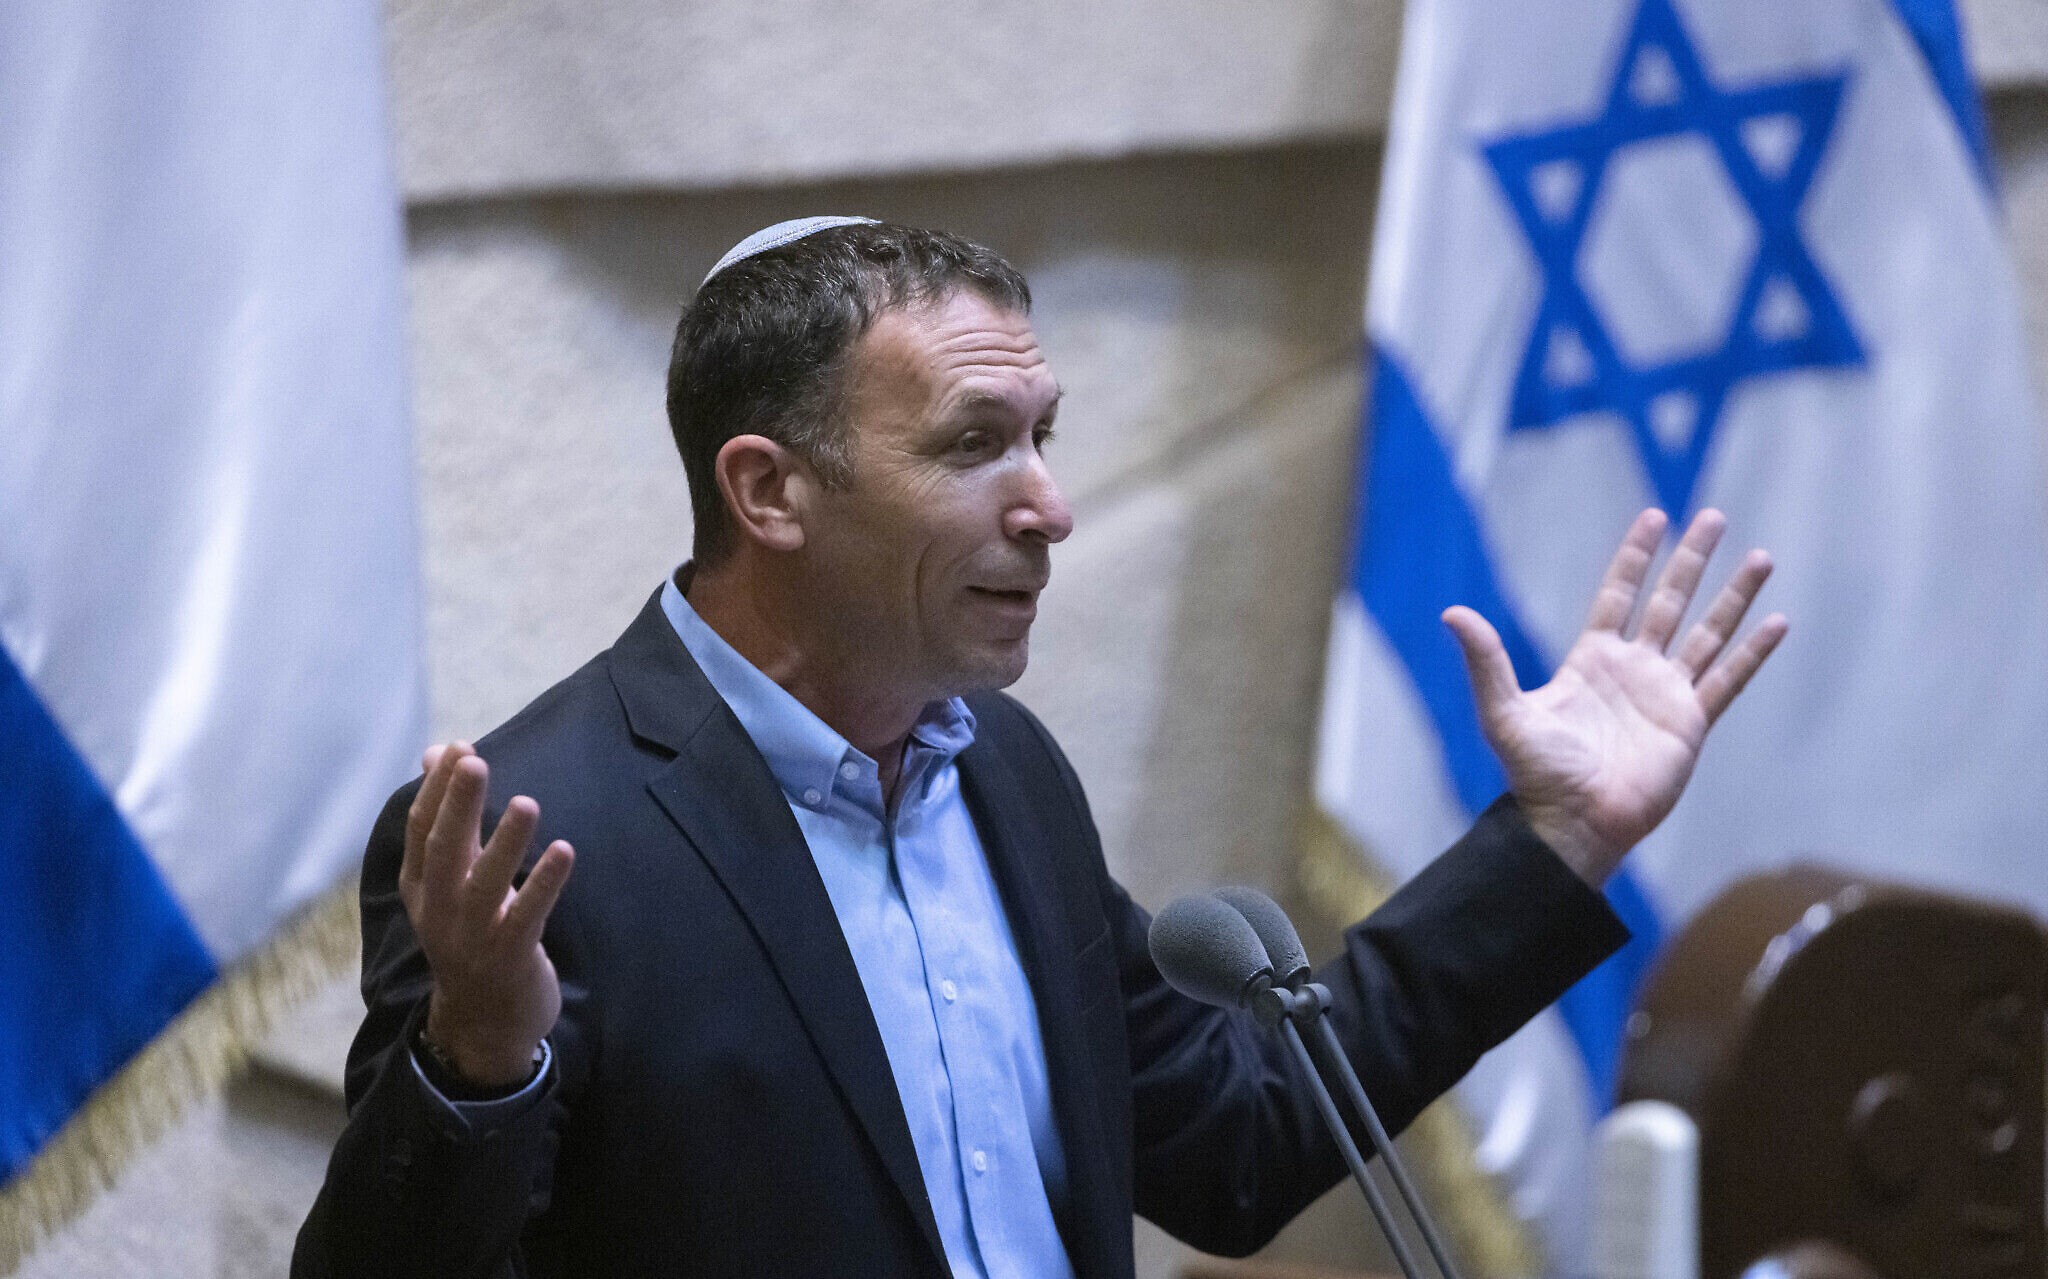 Minister of Religious Services Matan Kahana speaks in the Knesset on June 28, 2021. (Olivier Fitoussi/Flash90)